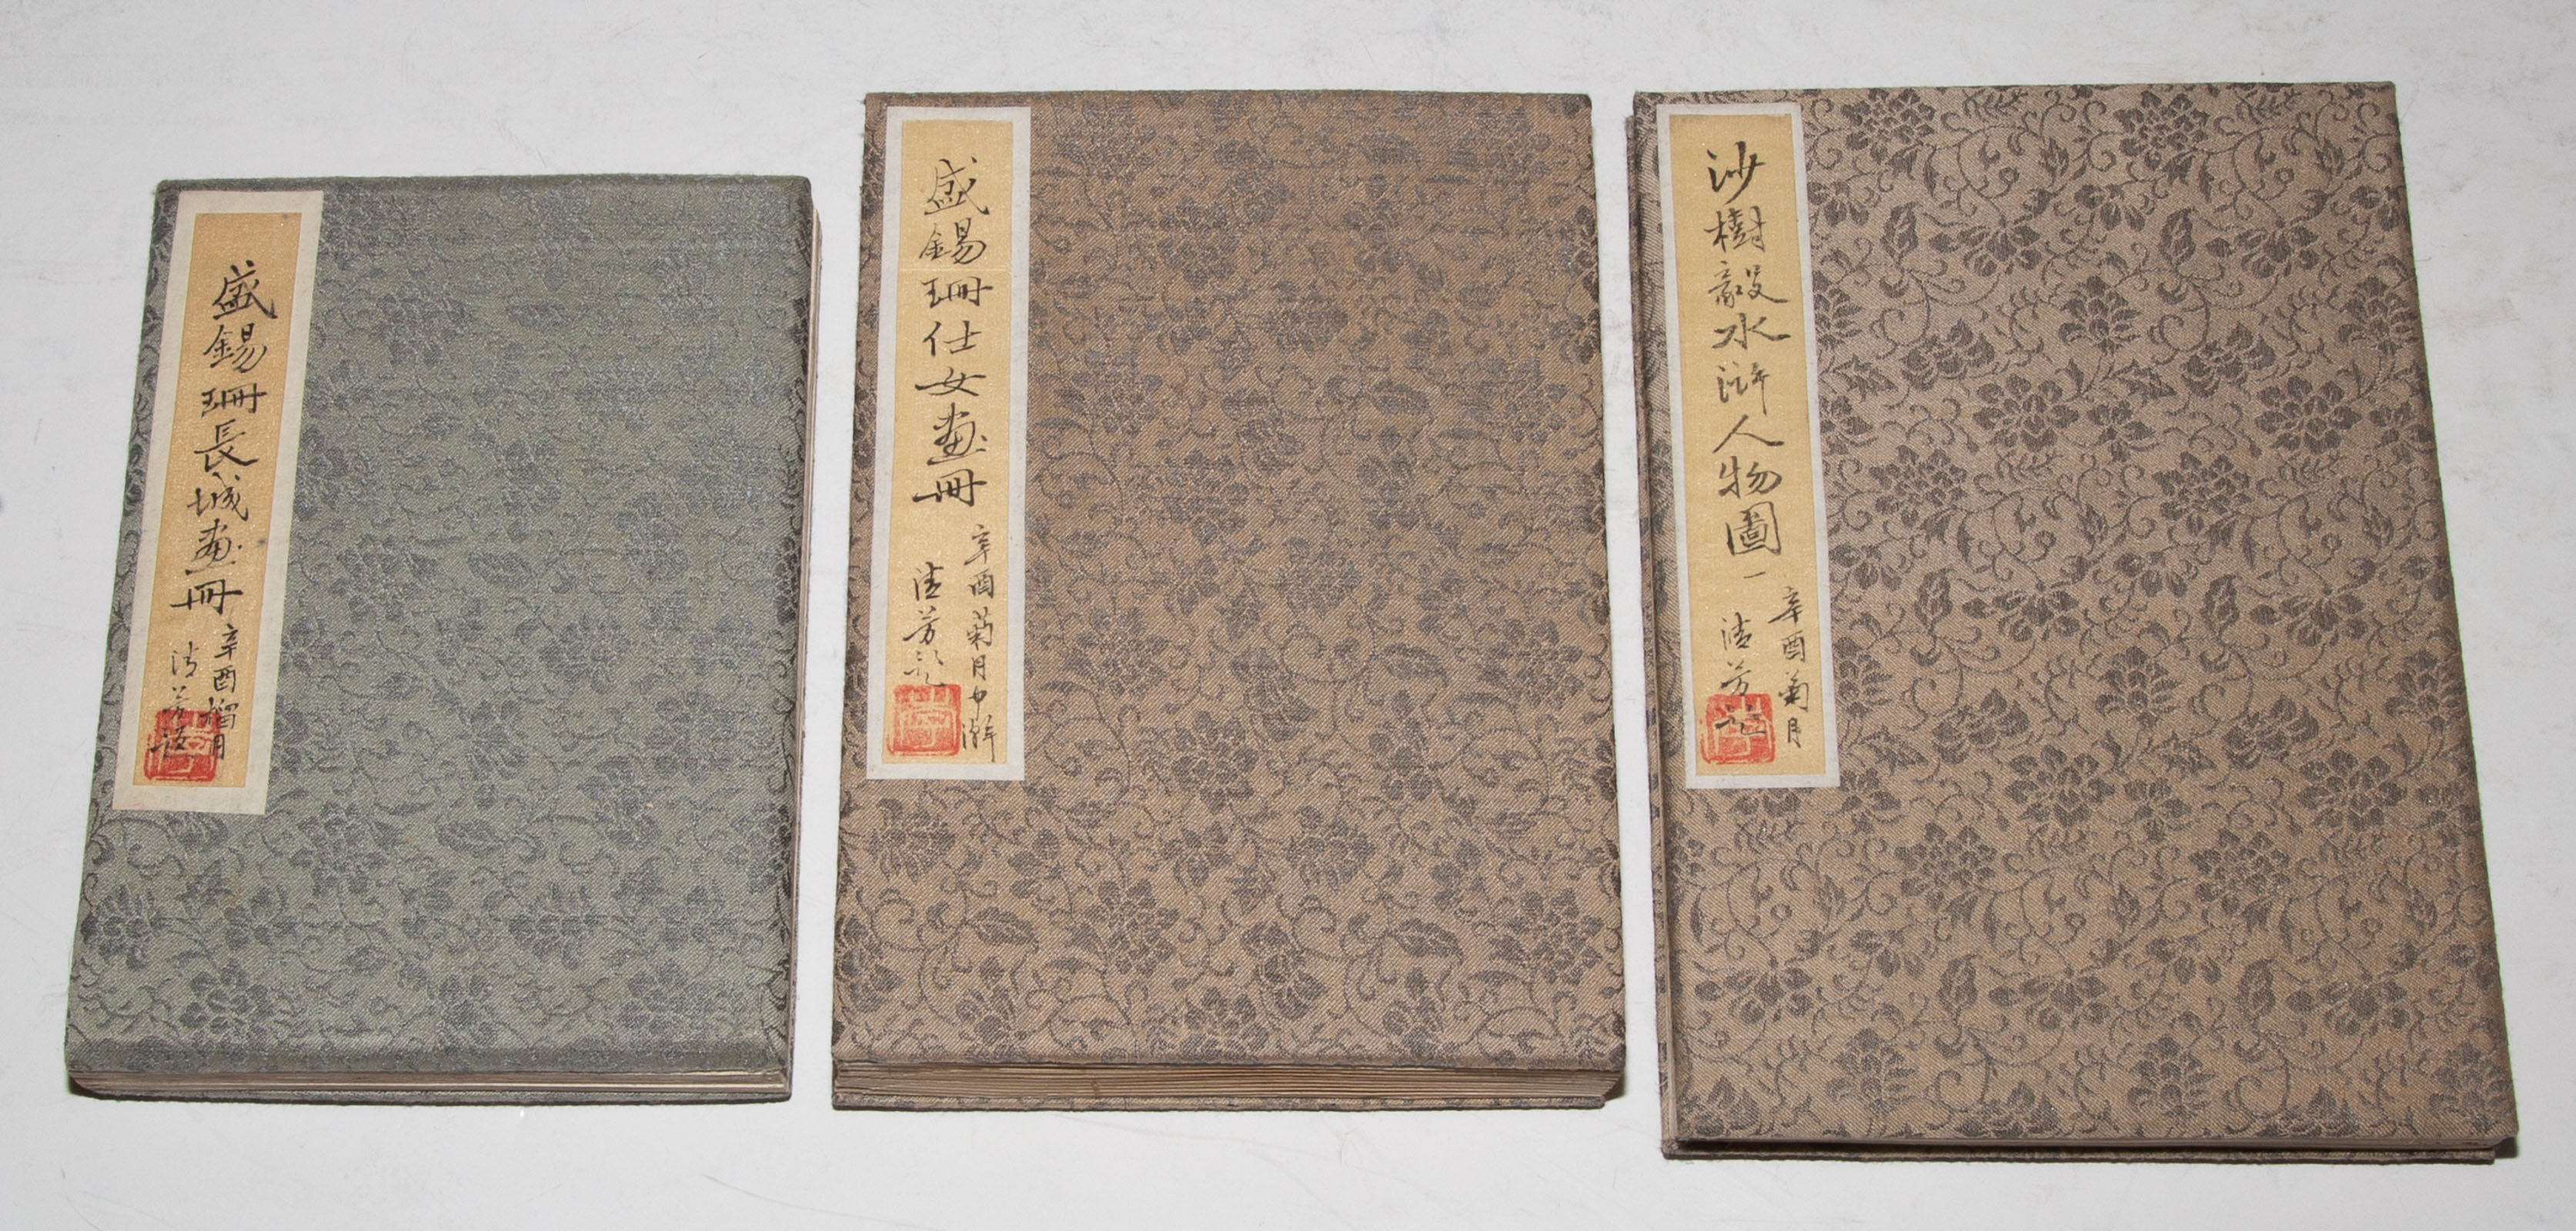 THREE CHINESE HAND PAINTED ALBUMS  3384b0